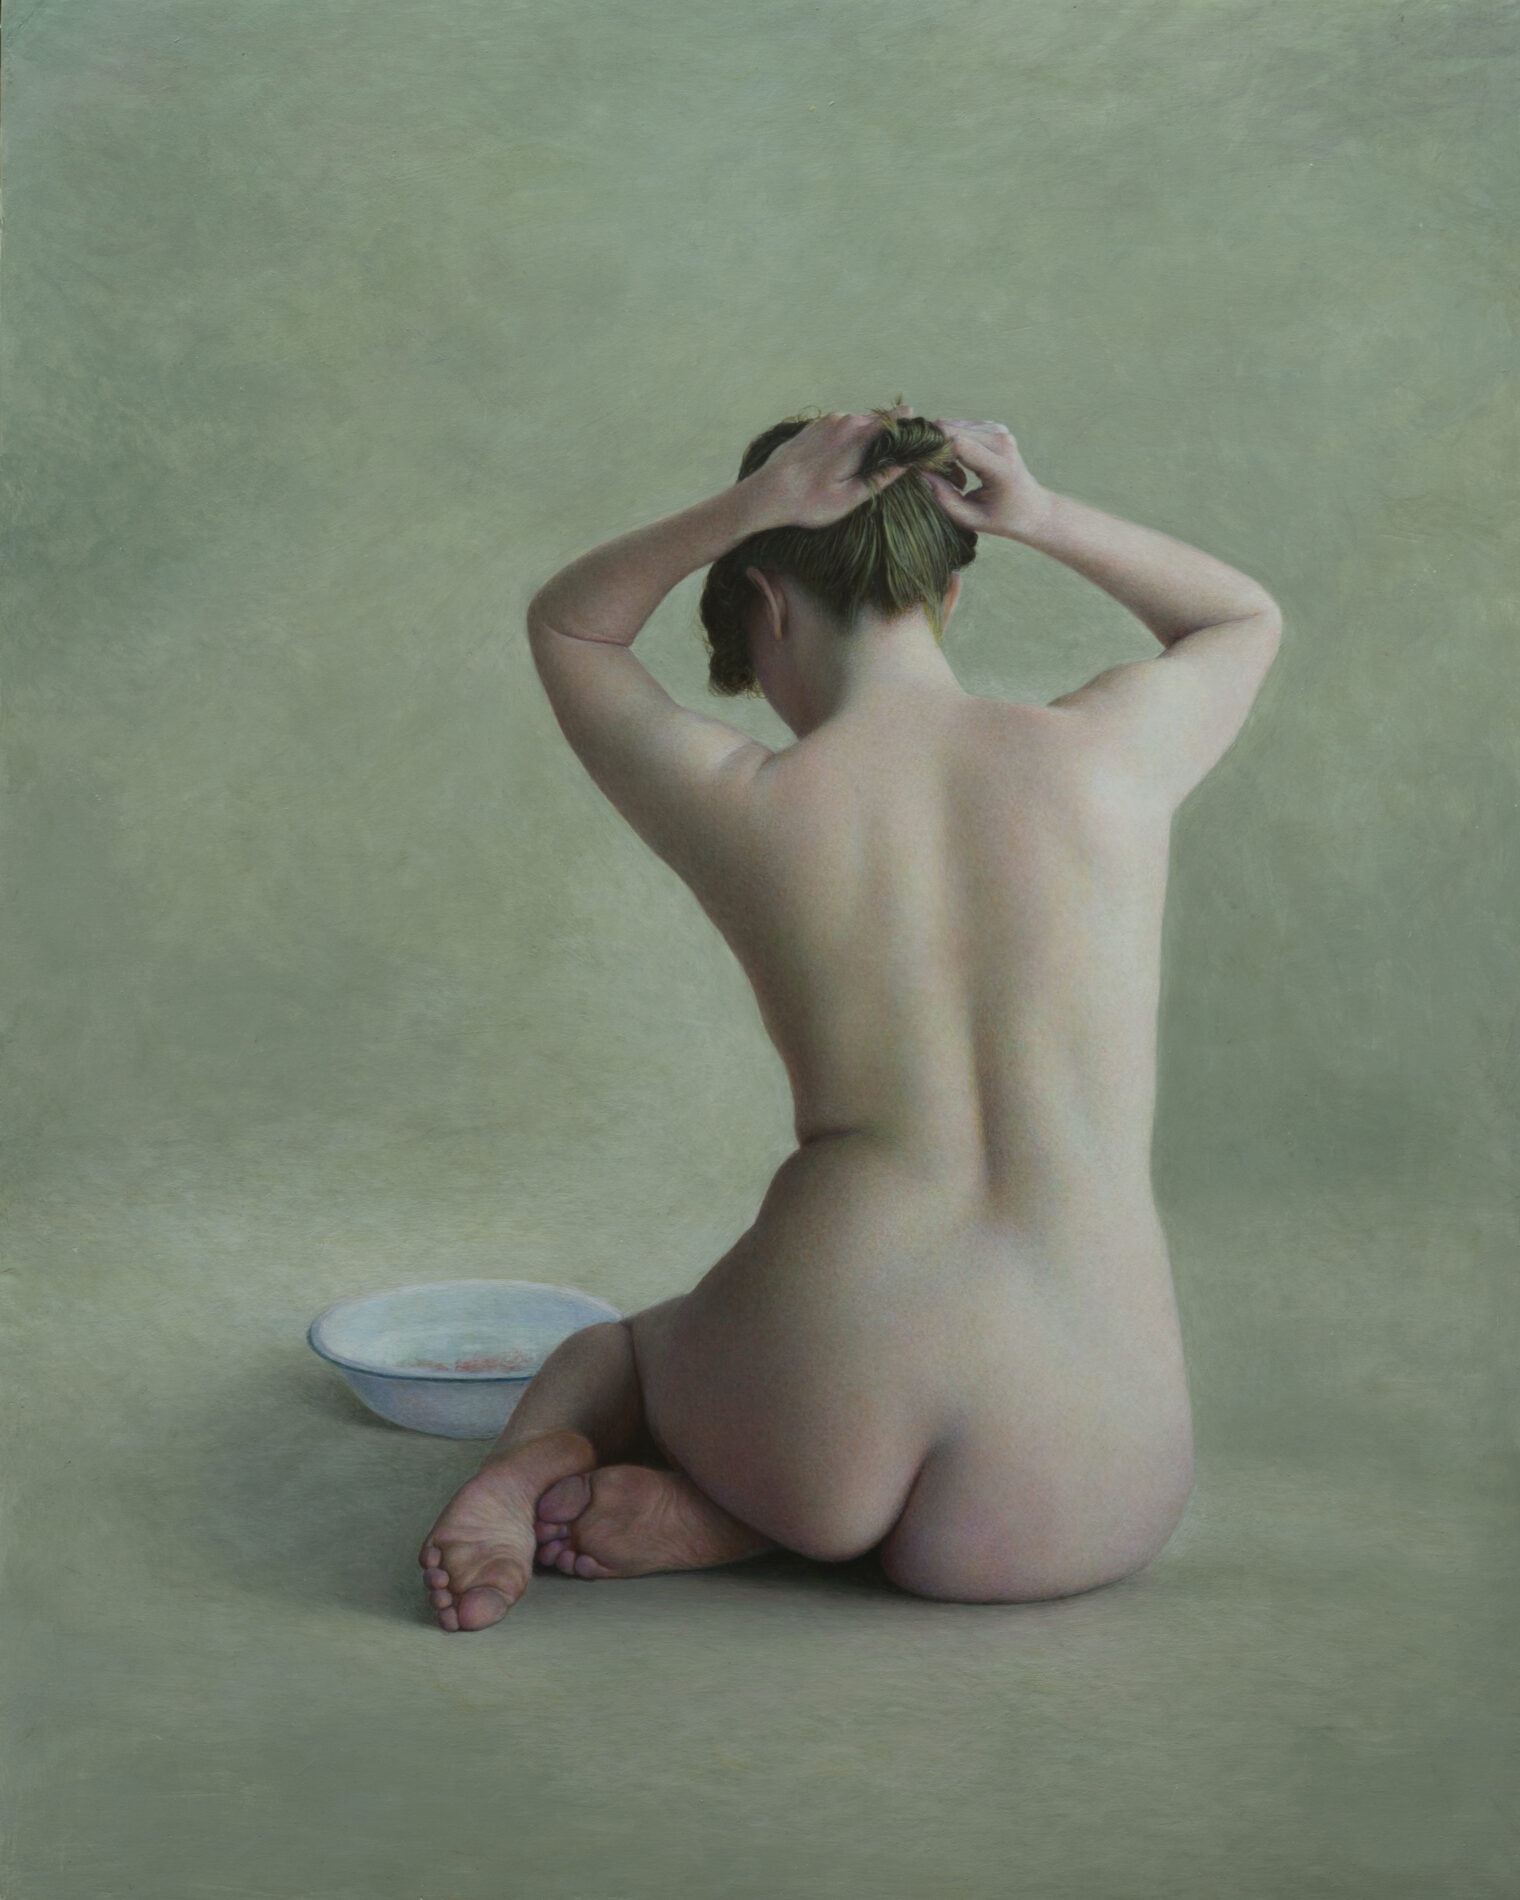 A nude woman, from behind, sits on the ground, fixing her hair bun, a ceramic bowl in front of her.